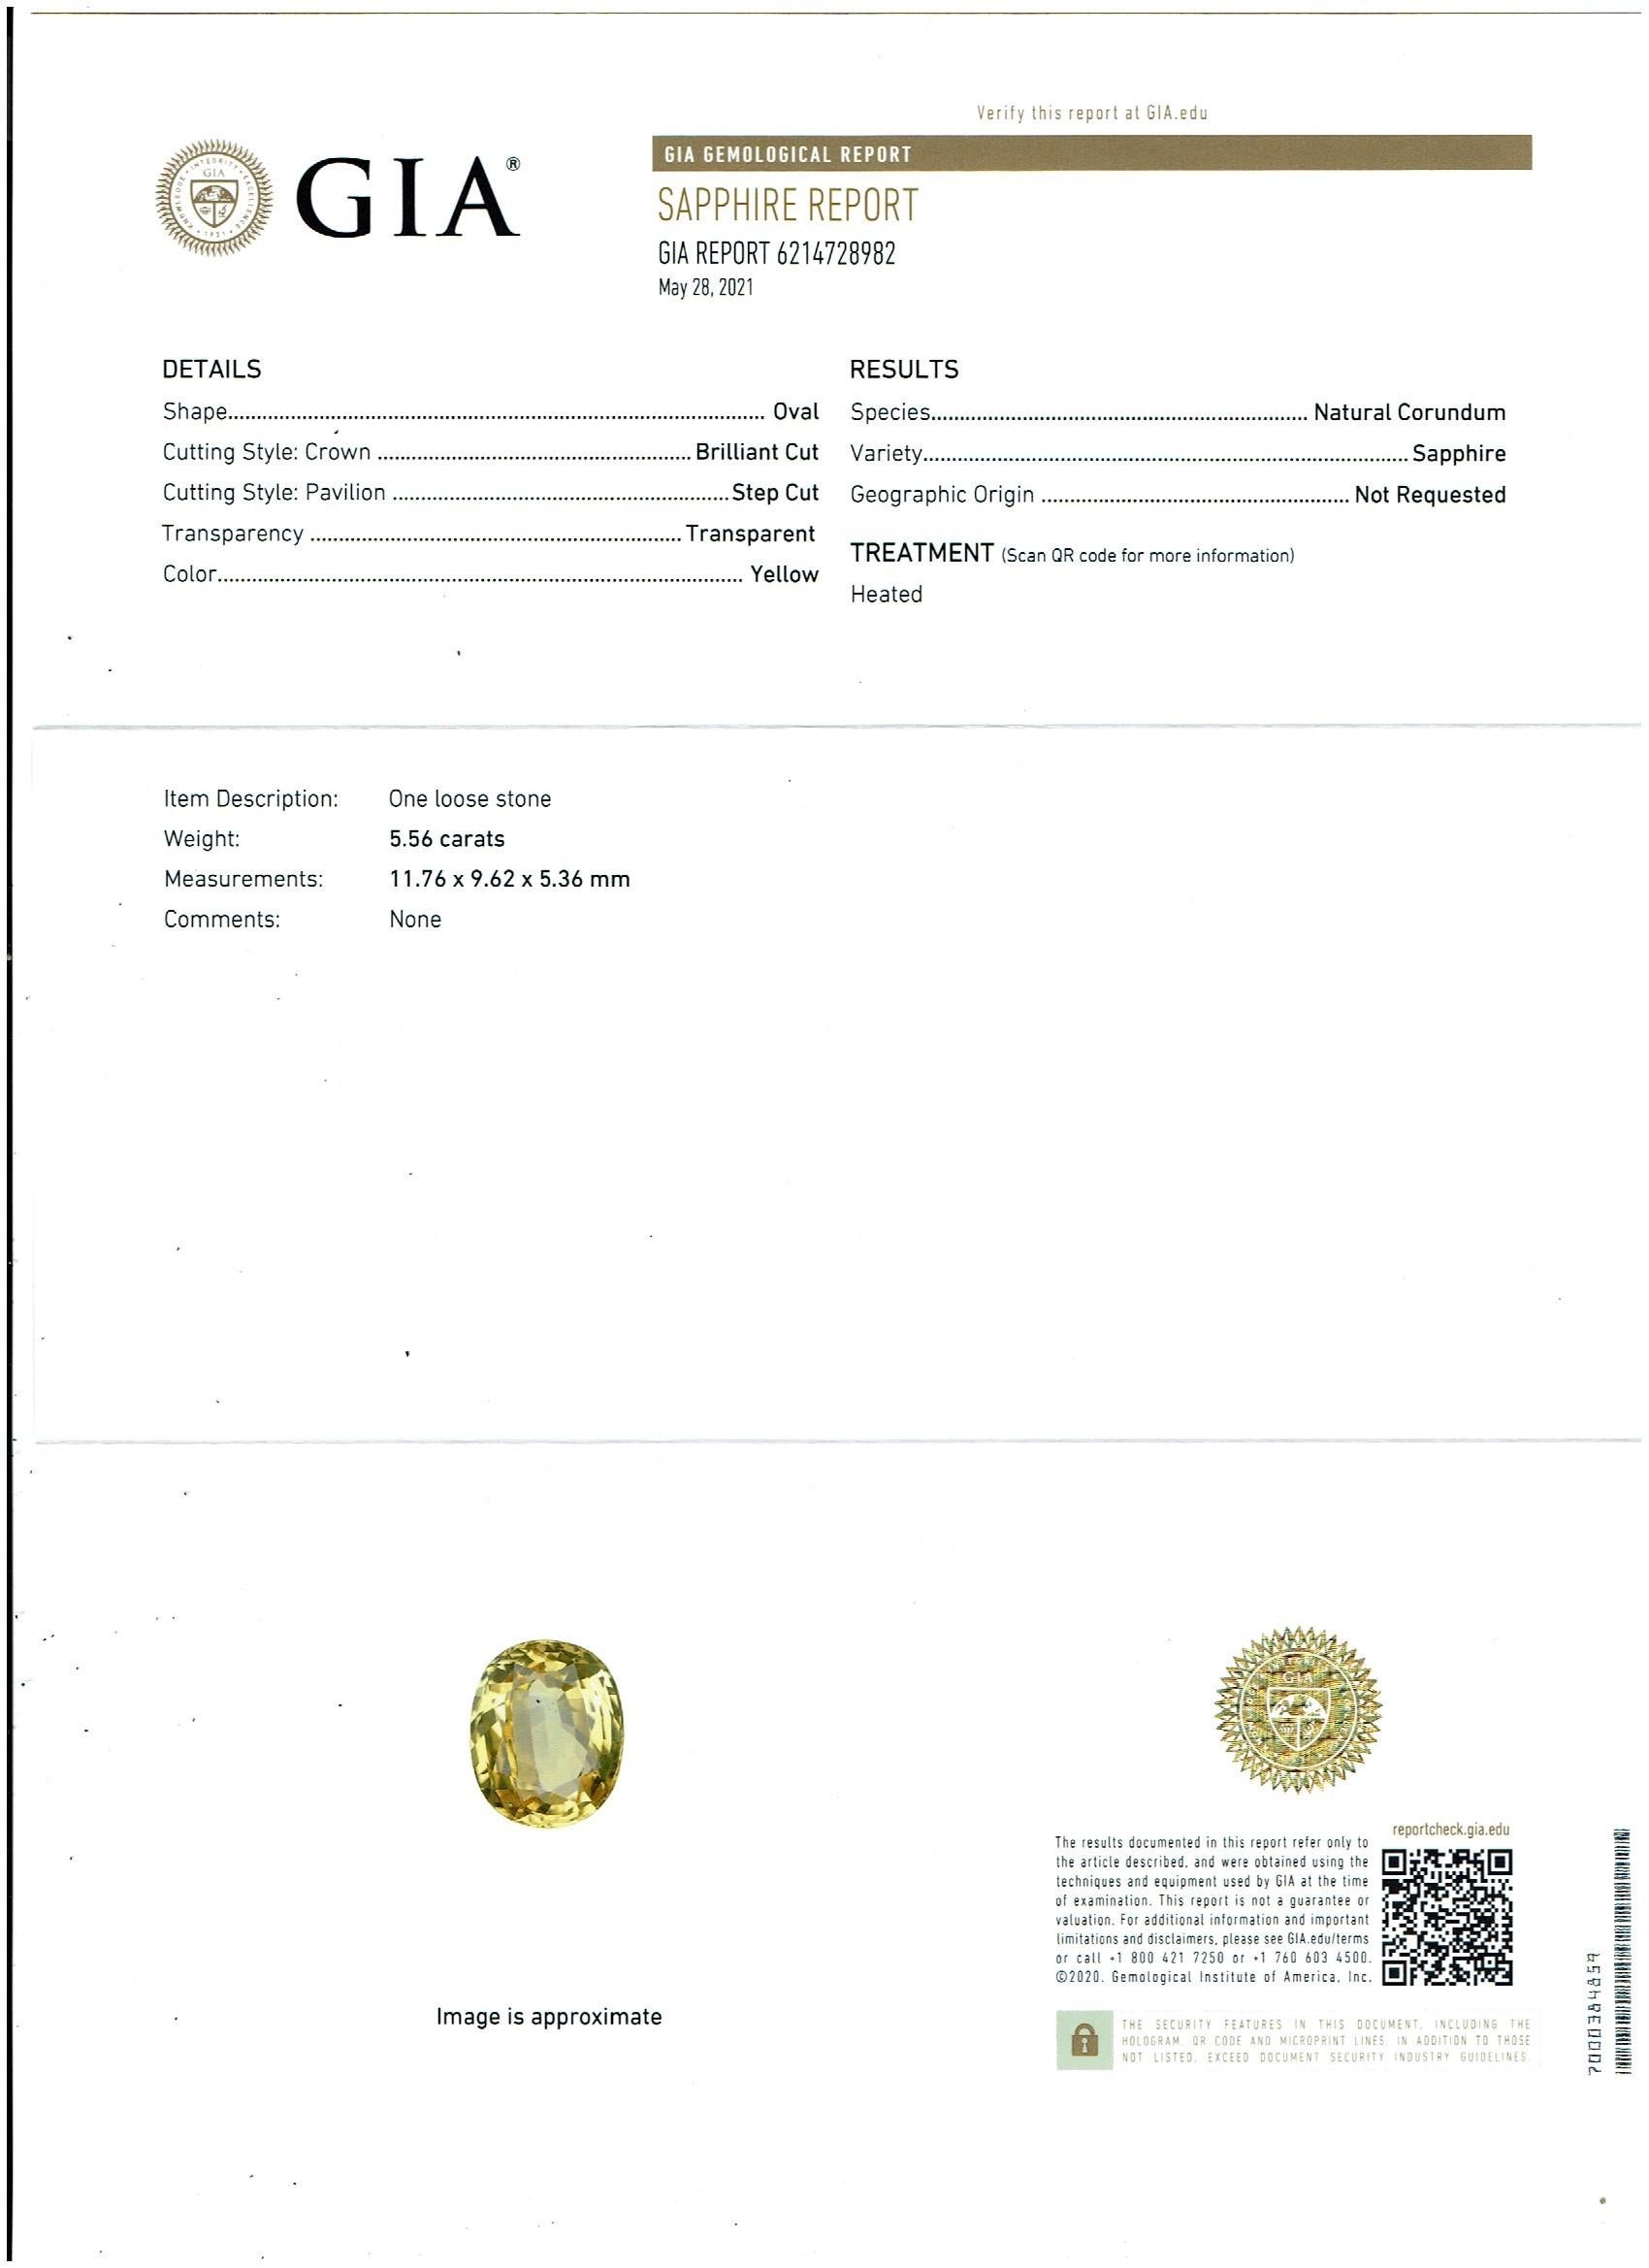 GIA Certified 5.56 Ct Natural Ceylon Yellow Sapphire Pendant Necklace white Gold For Sale 2